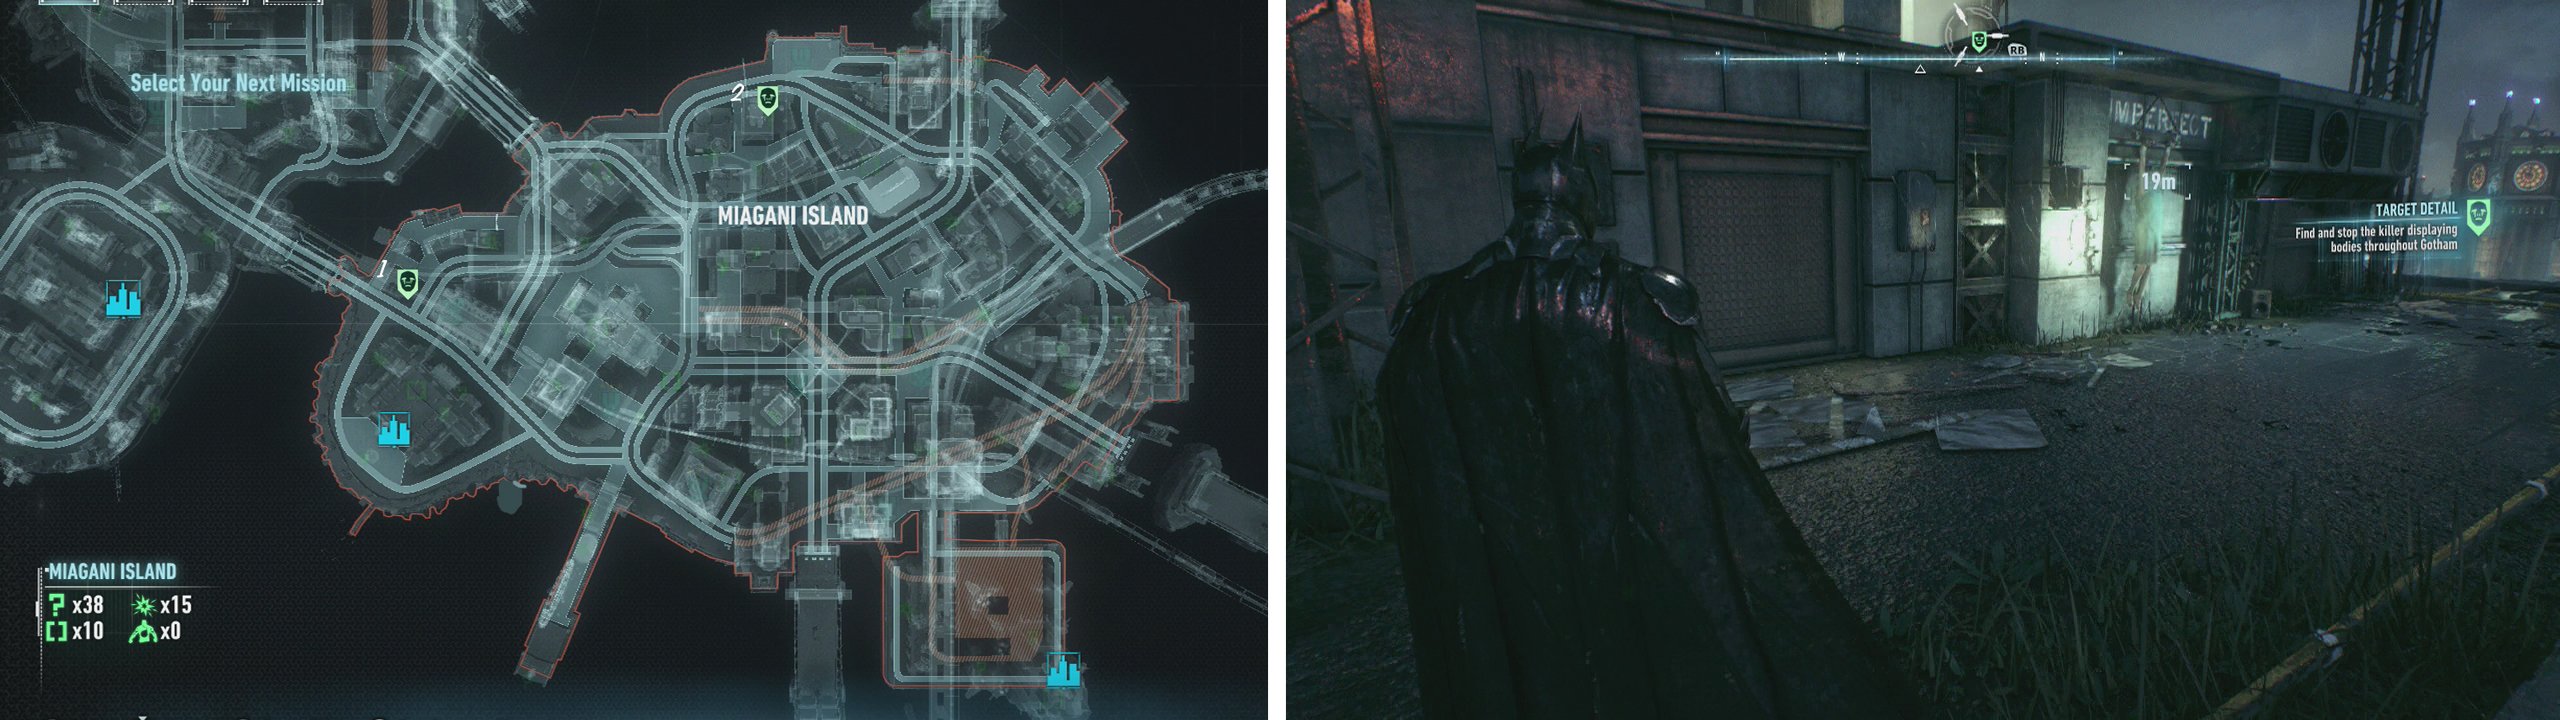 Part 1 - Find the Victims - The Perfect Crime - Most Wanted Mission  Walkthroughs | Batman: Arkham Knight | Gamer Guides®